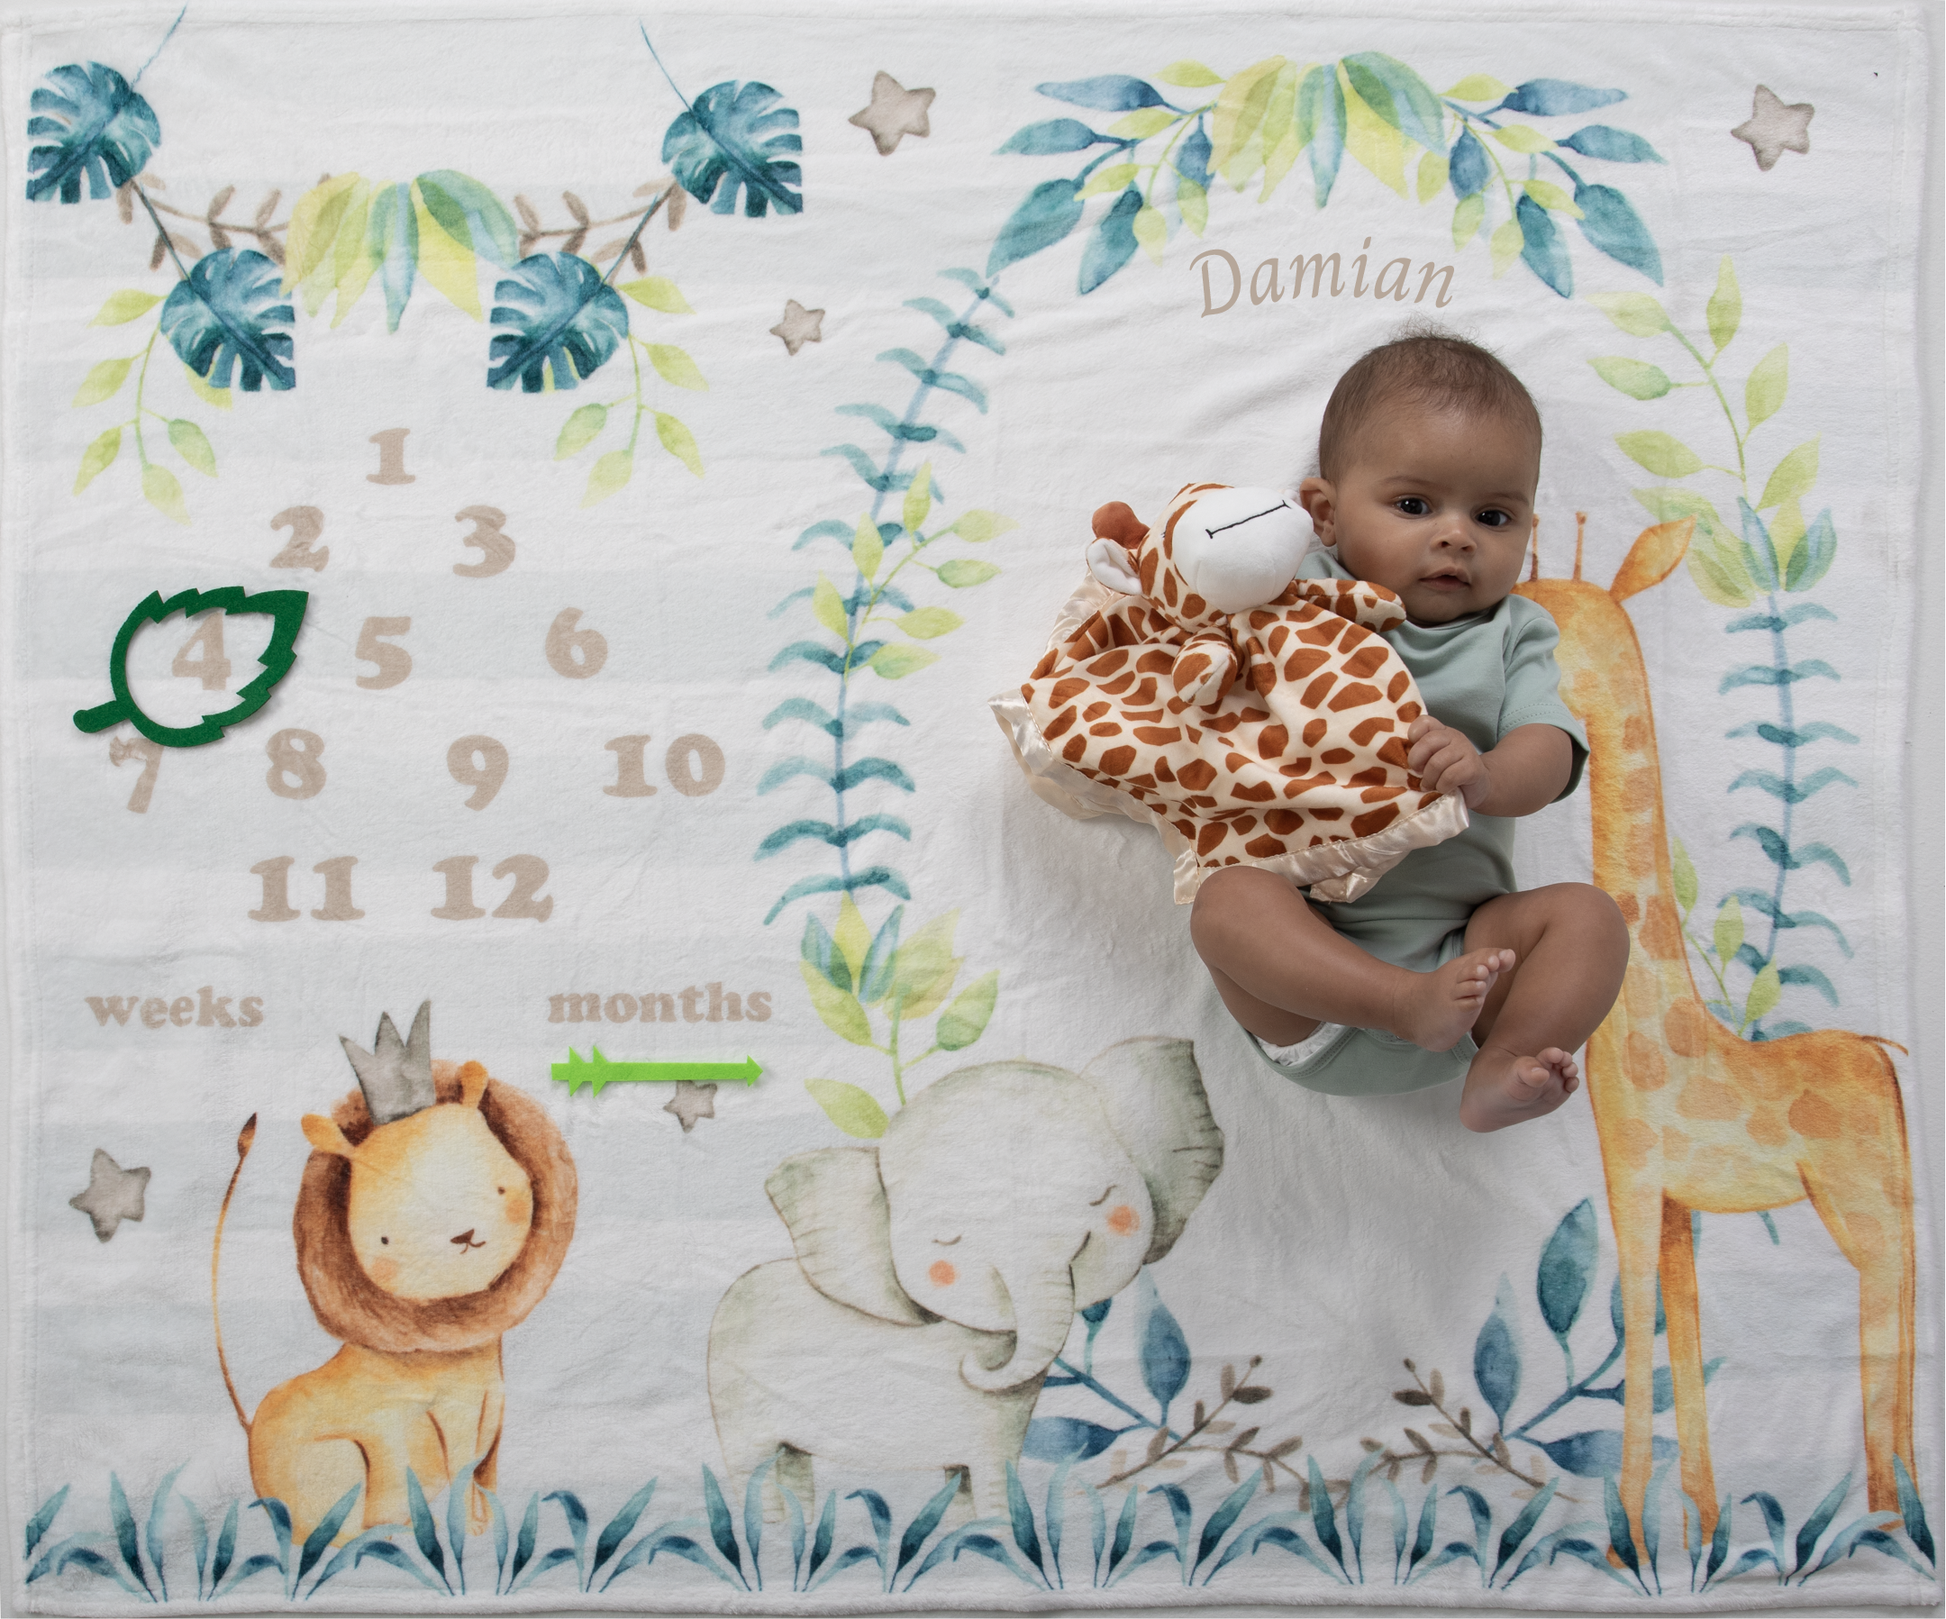 Capture your baby's growth and development with our soft and cozy wild life wonders safari animals milestone blanket. It's perfect for monthly photos to track your little one's growth and create cherished keepsakes.